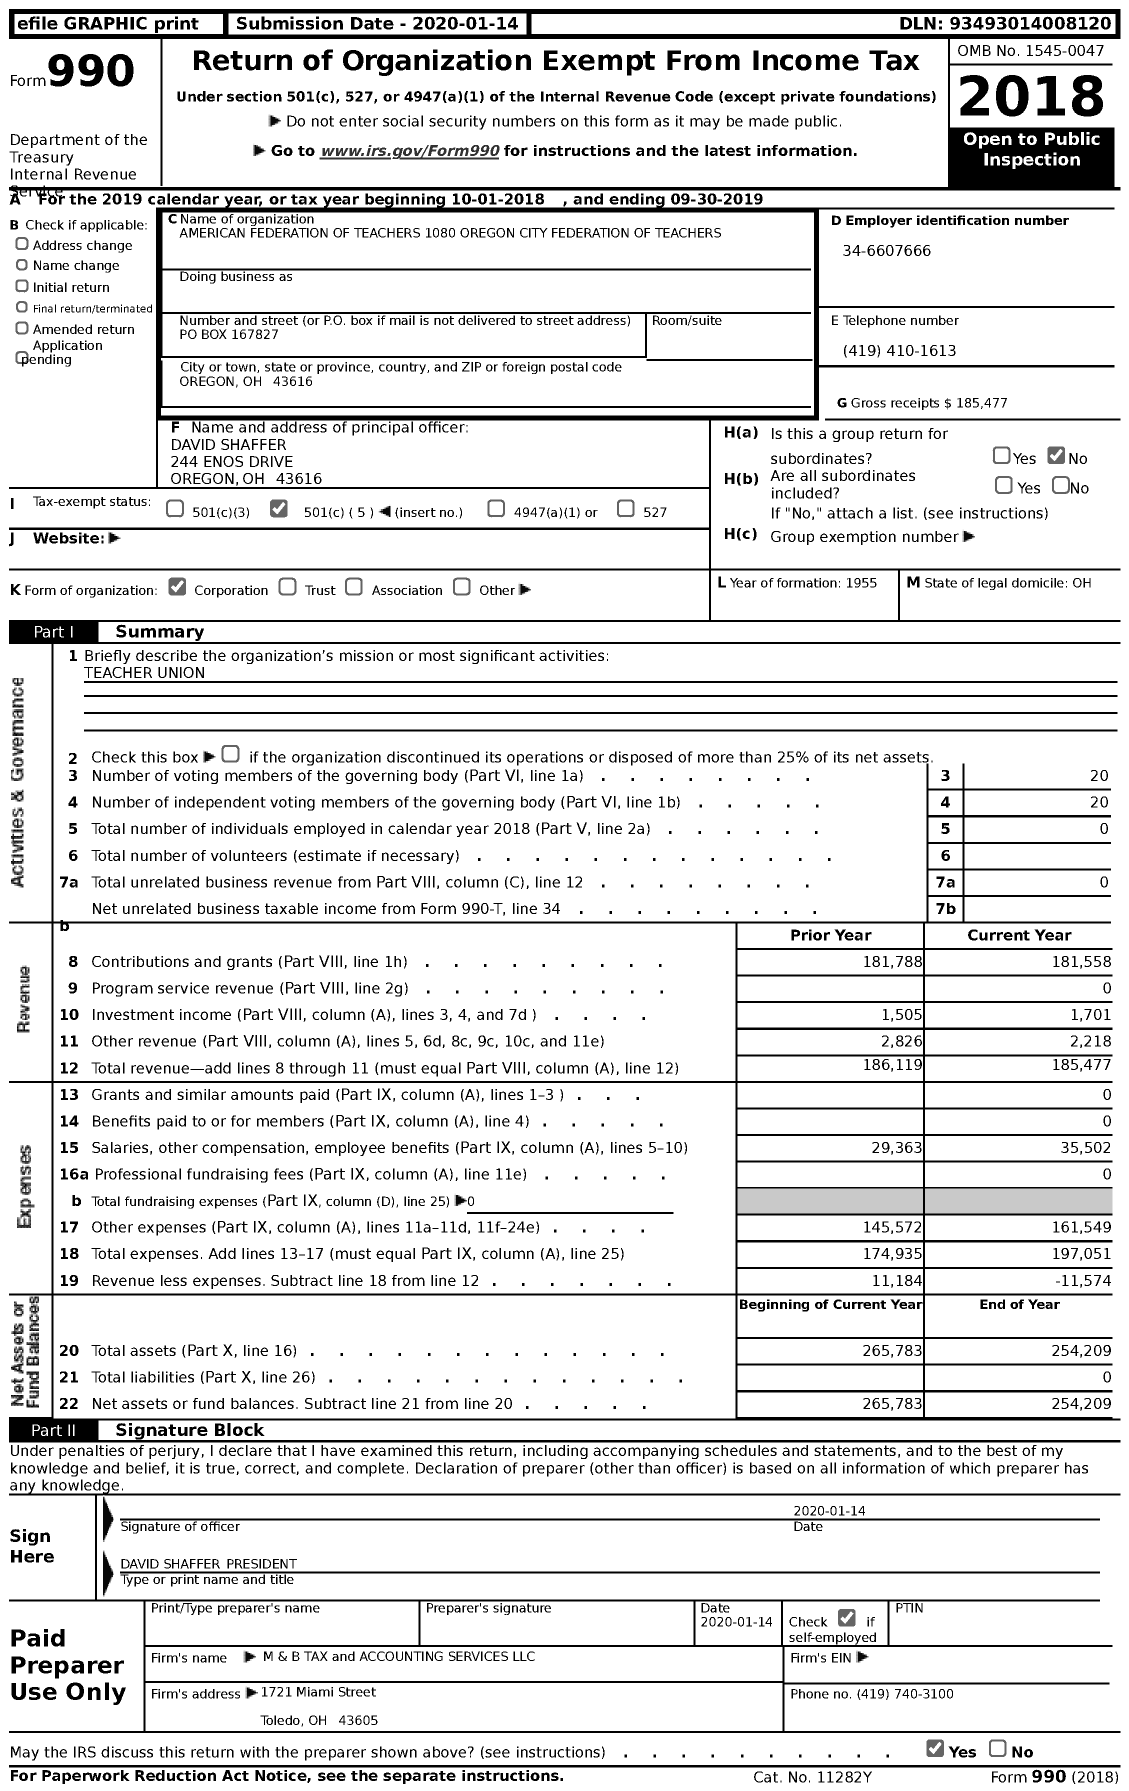 Image of first page of 2018 Form 990 for American Federation of Teachers - 1080 Oregon City Federation of Teac